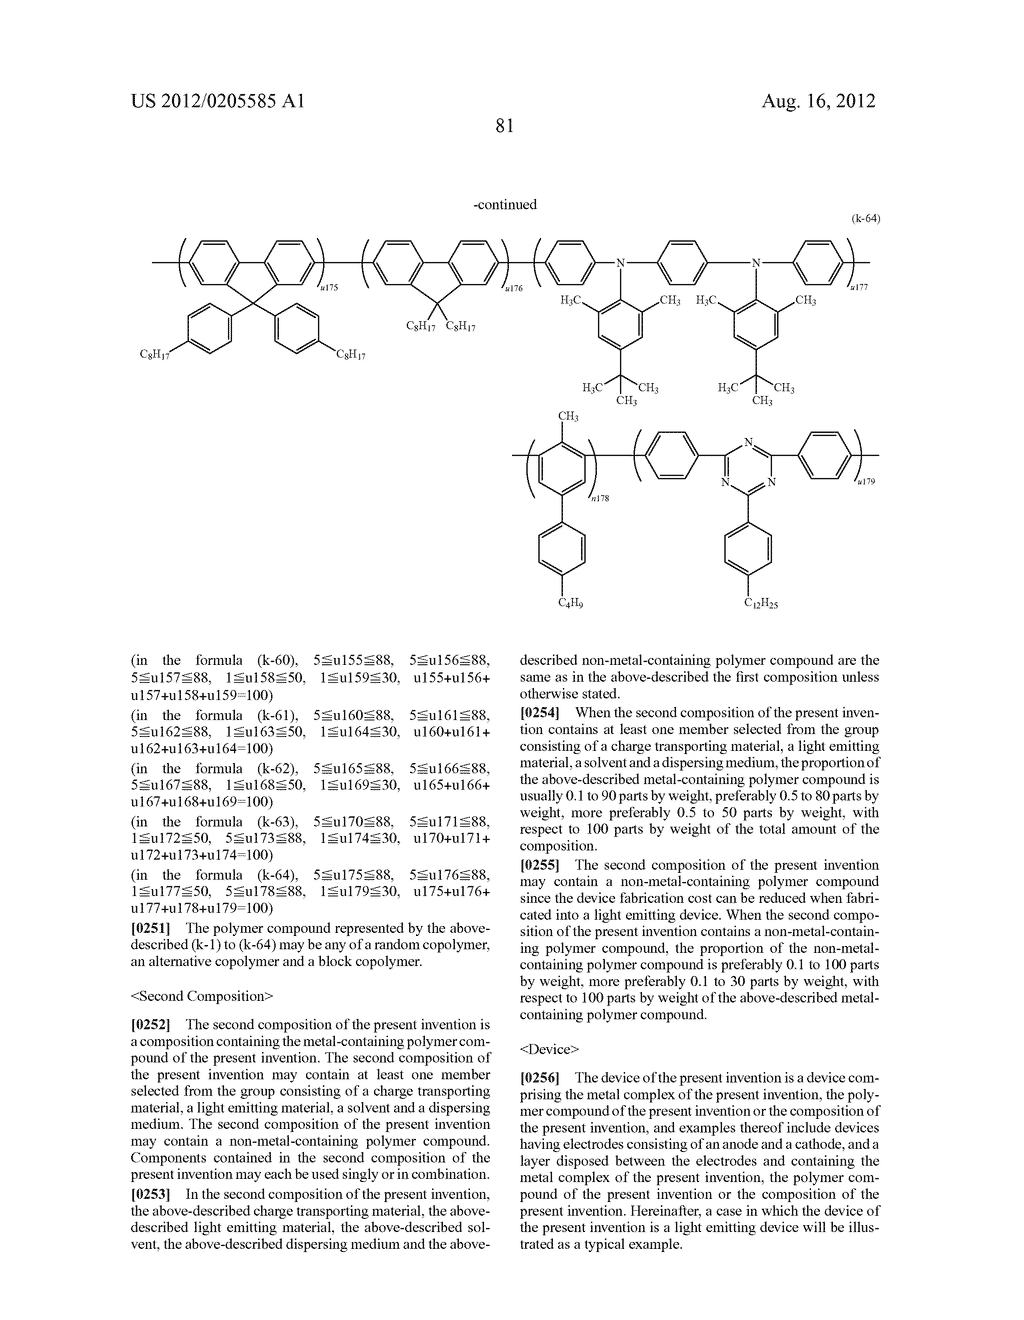 METAL COMPLEX, POLYMER COMPOUND AND DEVICE USING THE SAME - diagram, schematic, and image 82